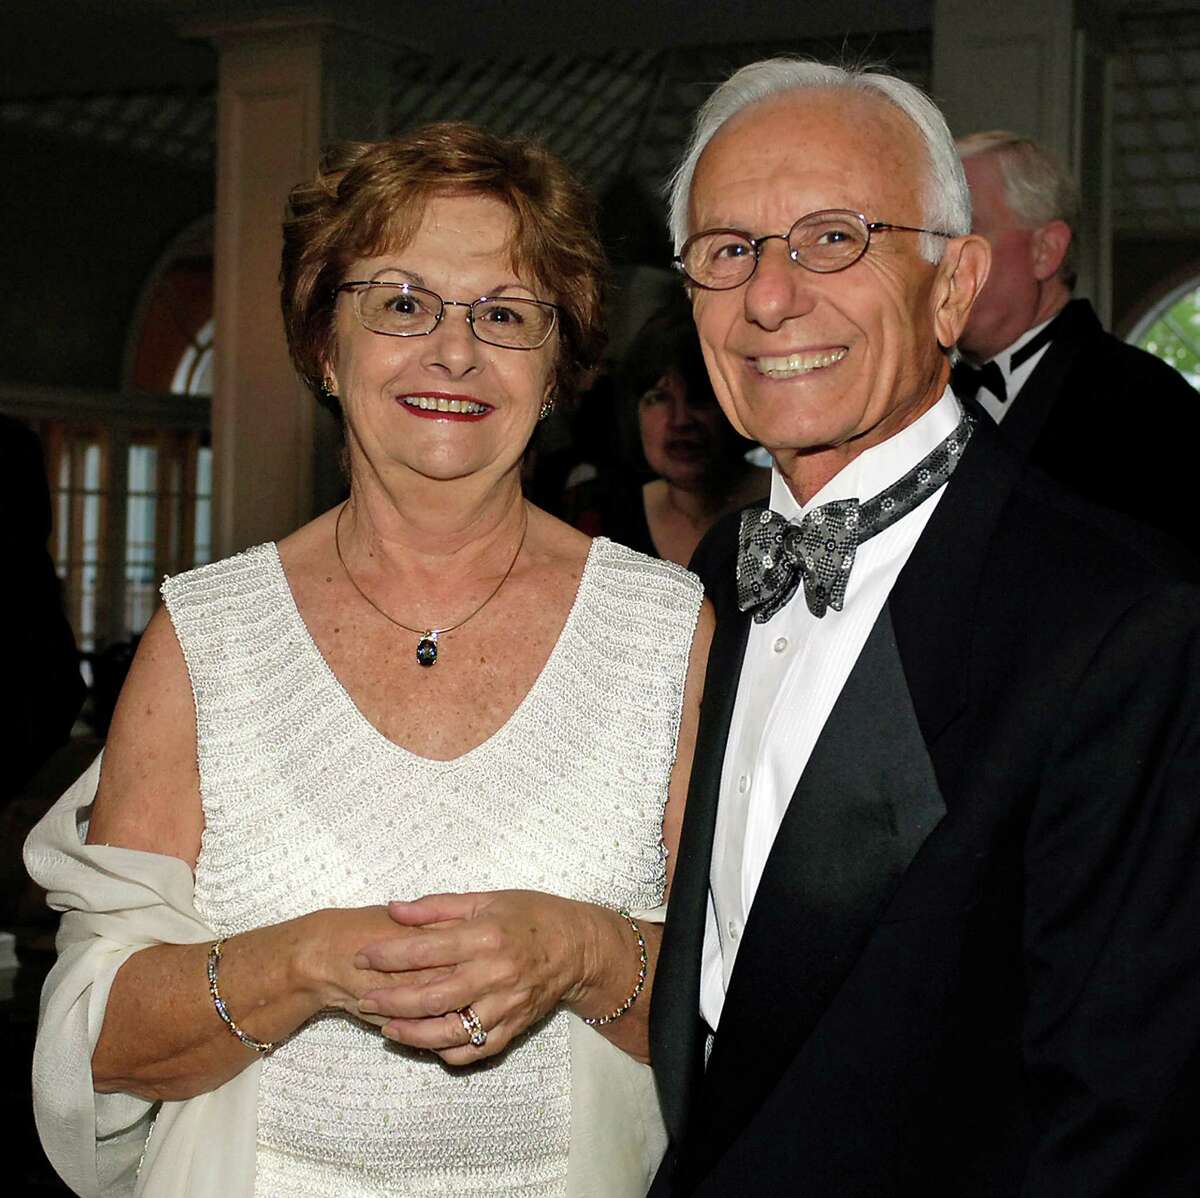 Western Connecticut State University announced today that local businessman and philanthropist Constantine âÄúDenoâÄù and Marie Macricostas has given a gift of $3 million from the Macricostas Family Fund to the university. This is the largest donation in WCSUâÄôs history. Photo credit: WCSU Photo/Peggy Stewart